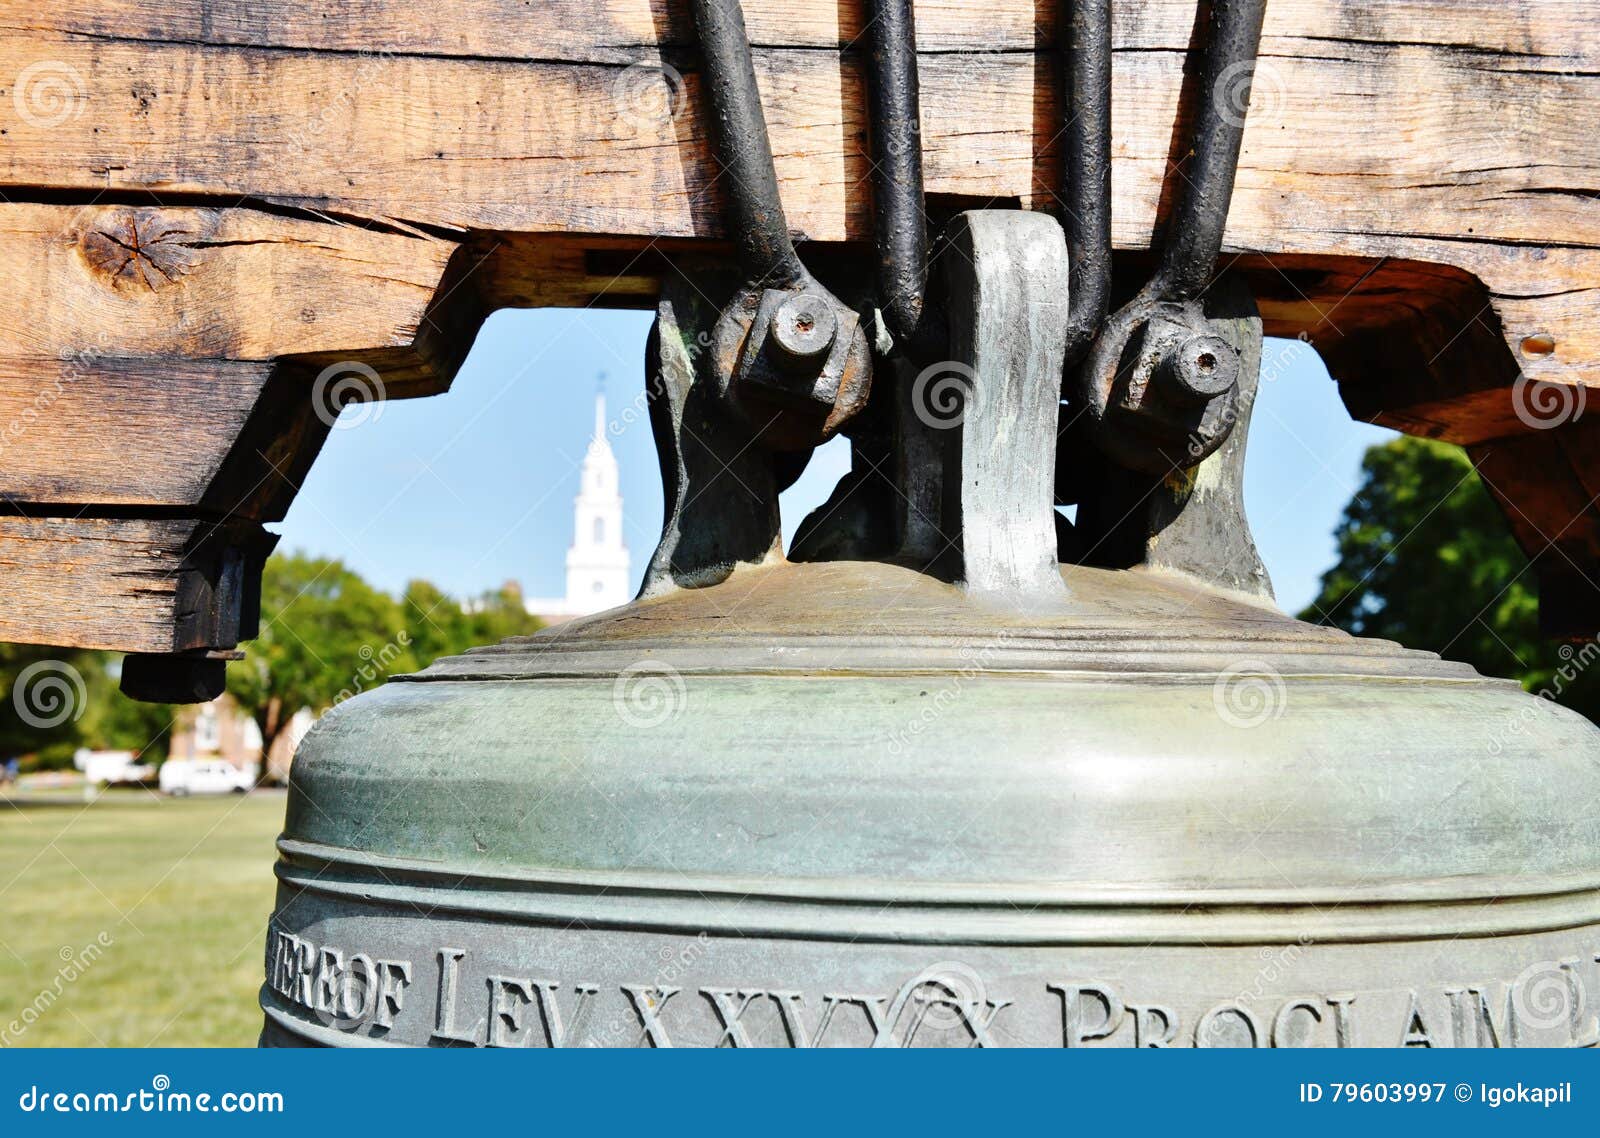 Dover Delaware State Usa Liberty Bell Editorial Photography - Image of tourism, 79603997